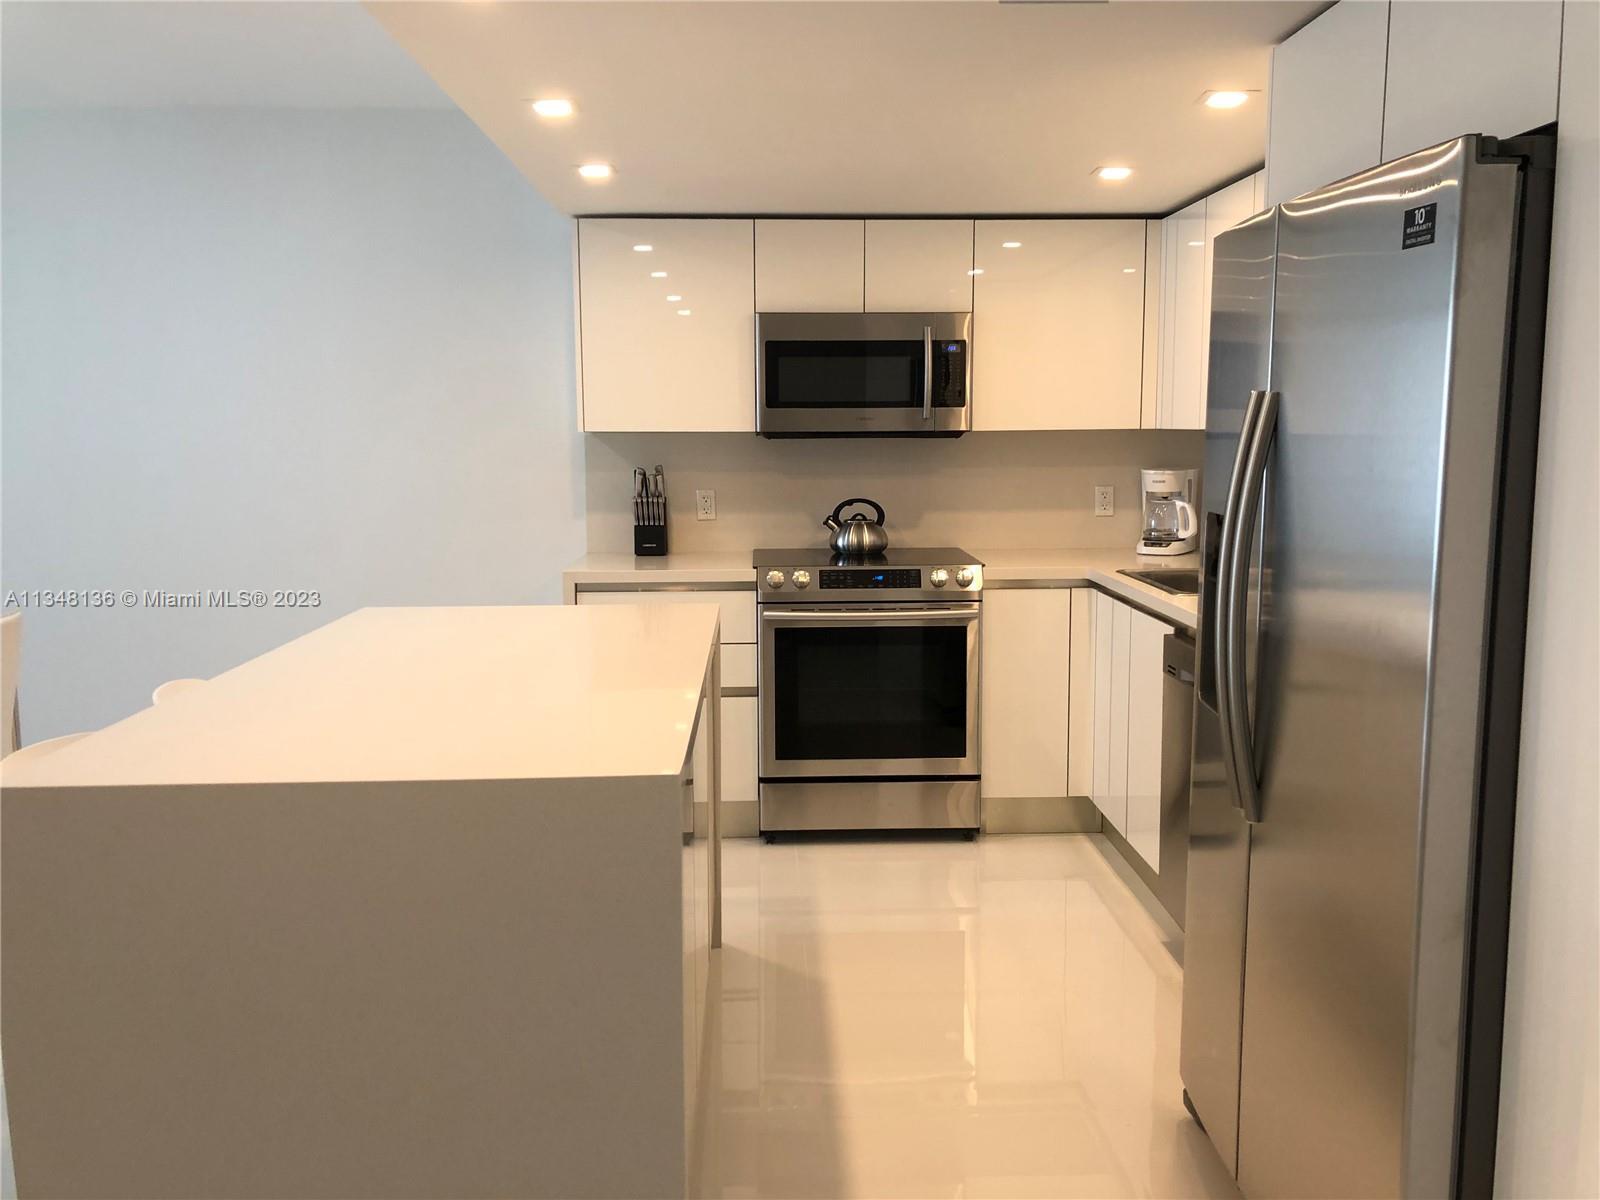 Completely remodeled with a converted den into a 2 bedroom apartment with WASHER-DRYER INSIDE. Large